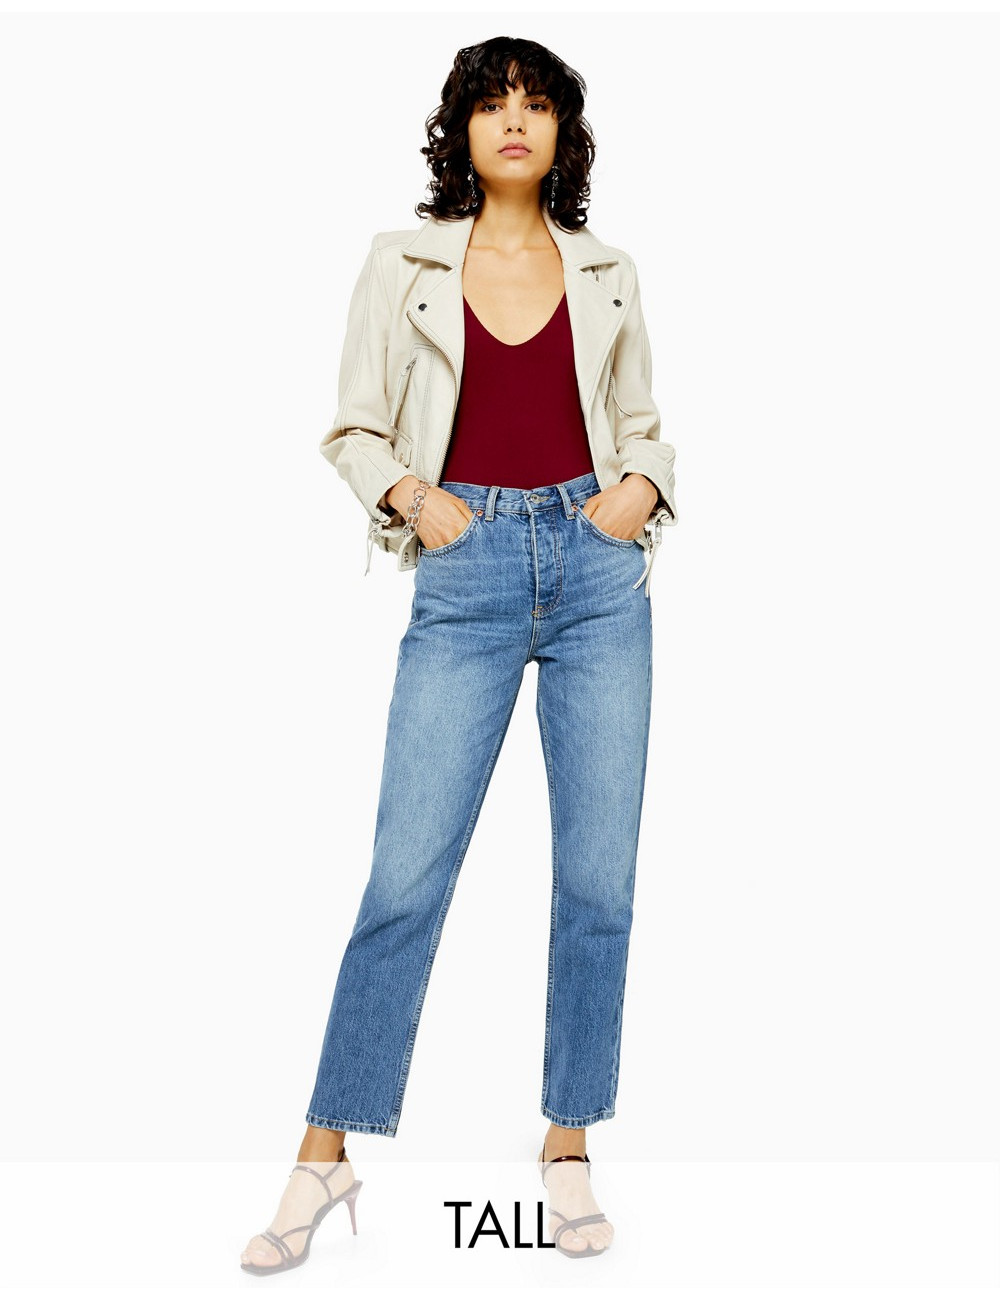 Topshop Tall Editor jeans...